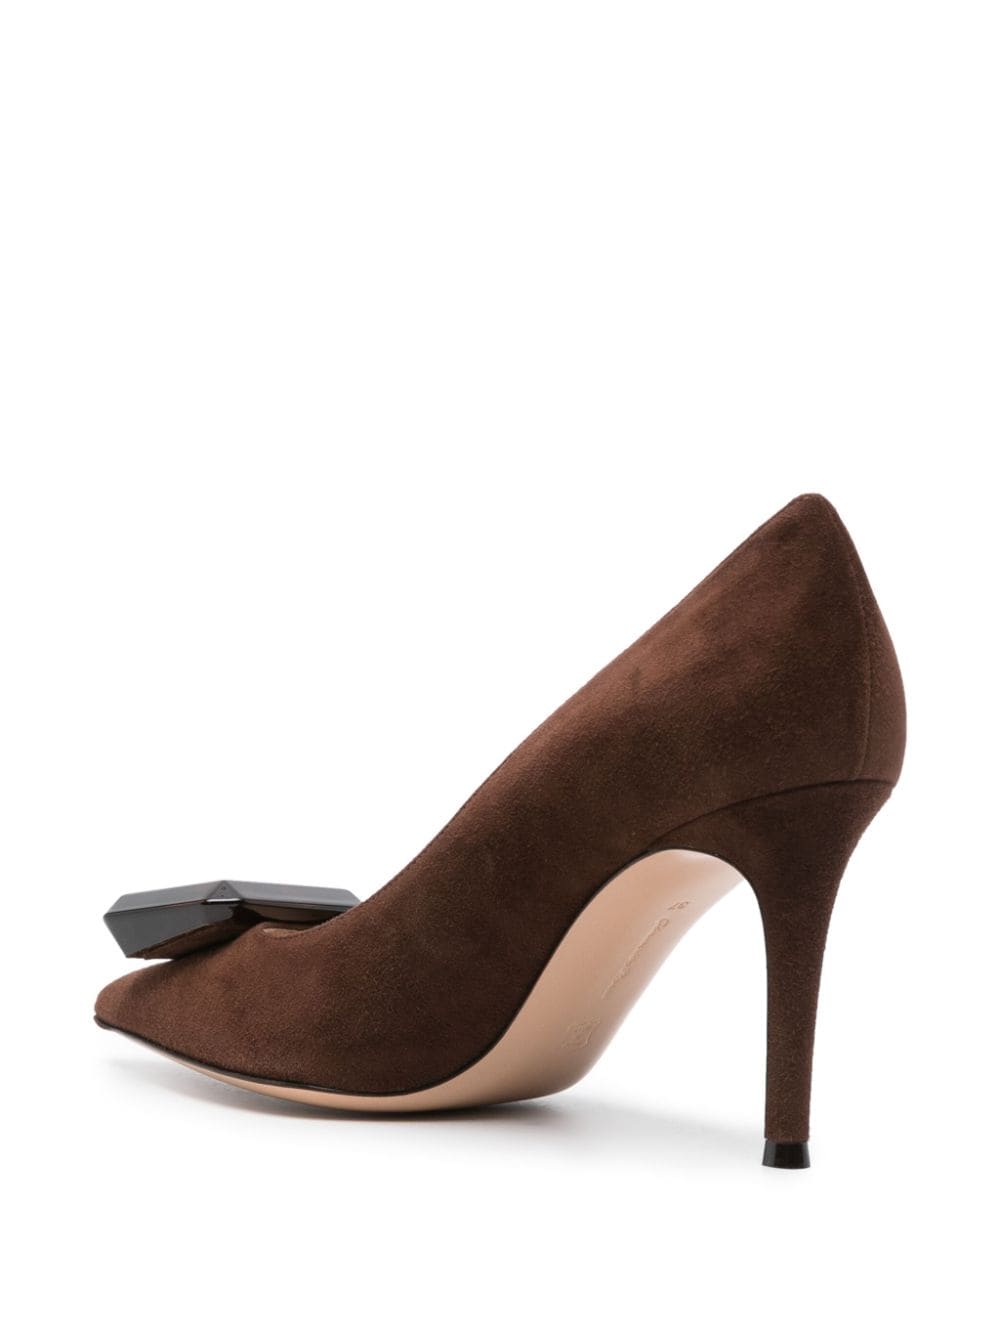 Shop Gianvito Rossi Jaipur 85mm Suede Pumps In Brown